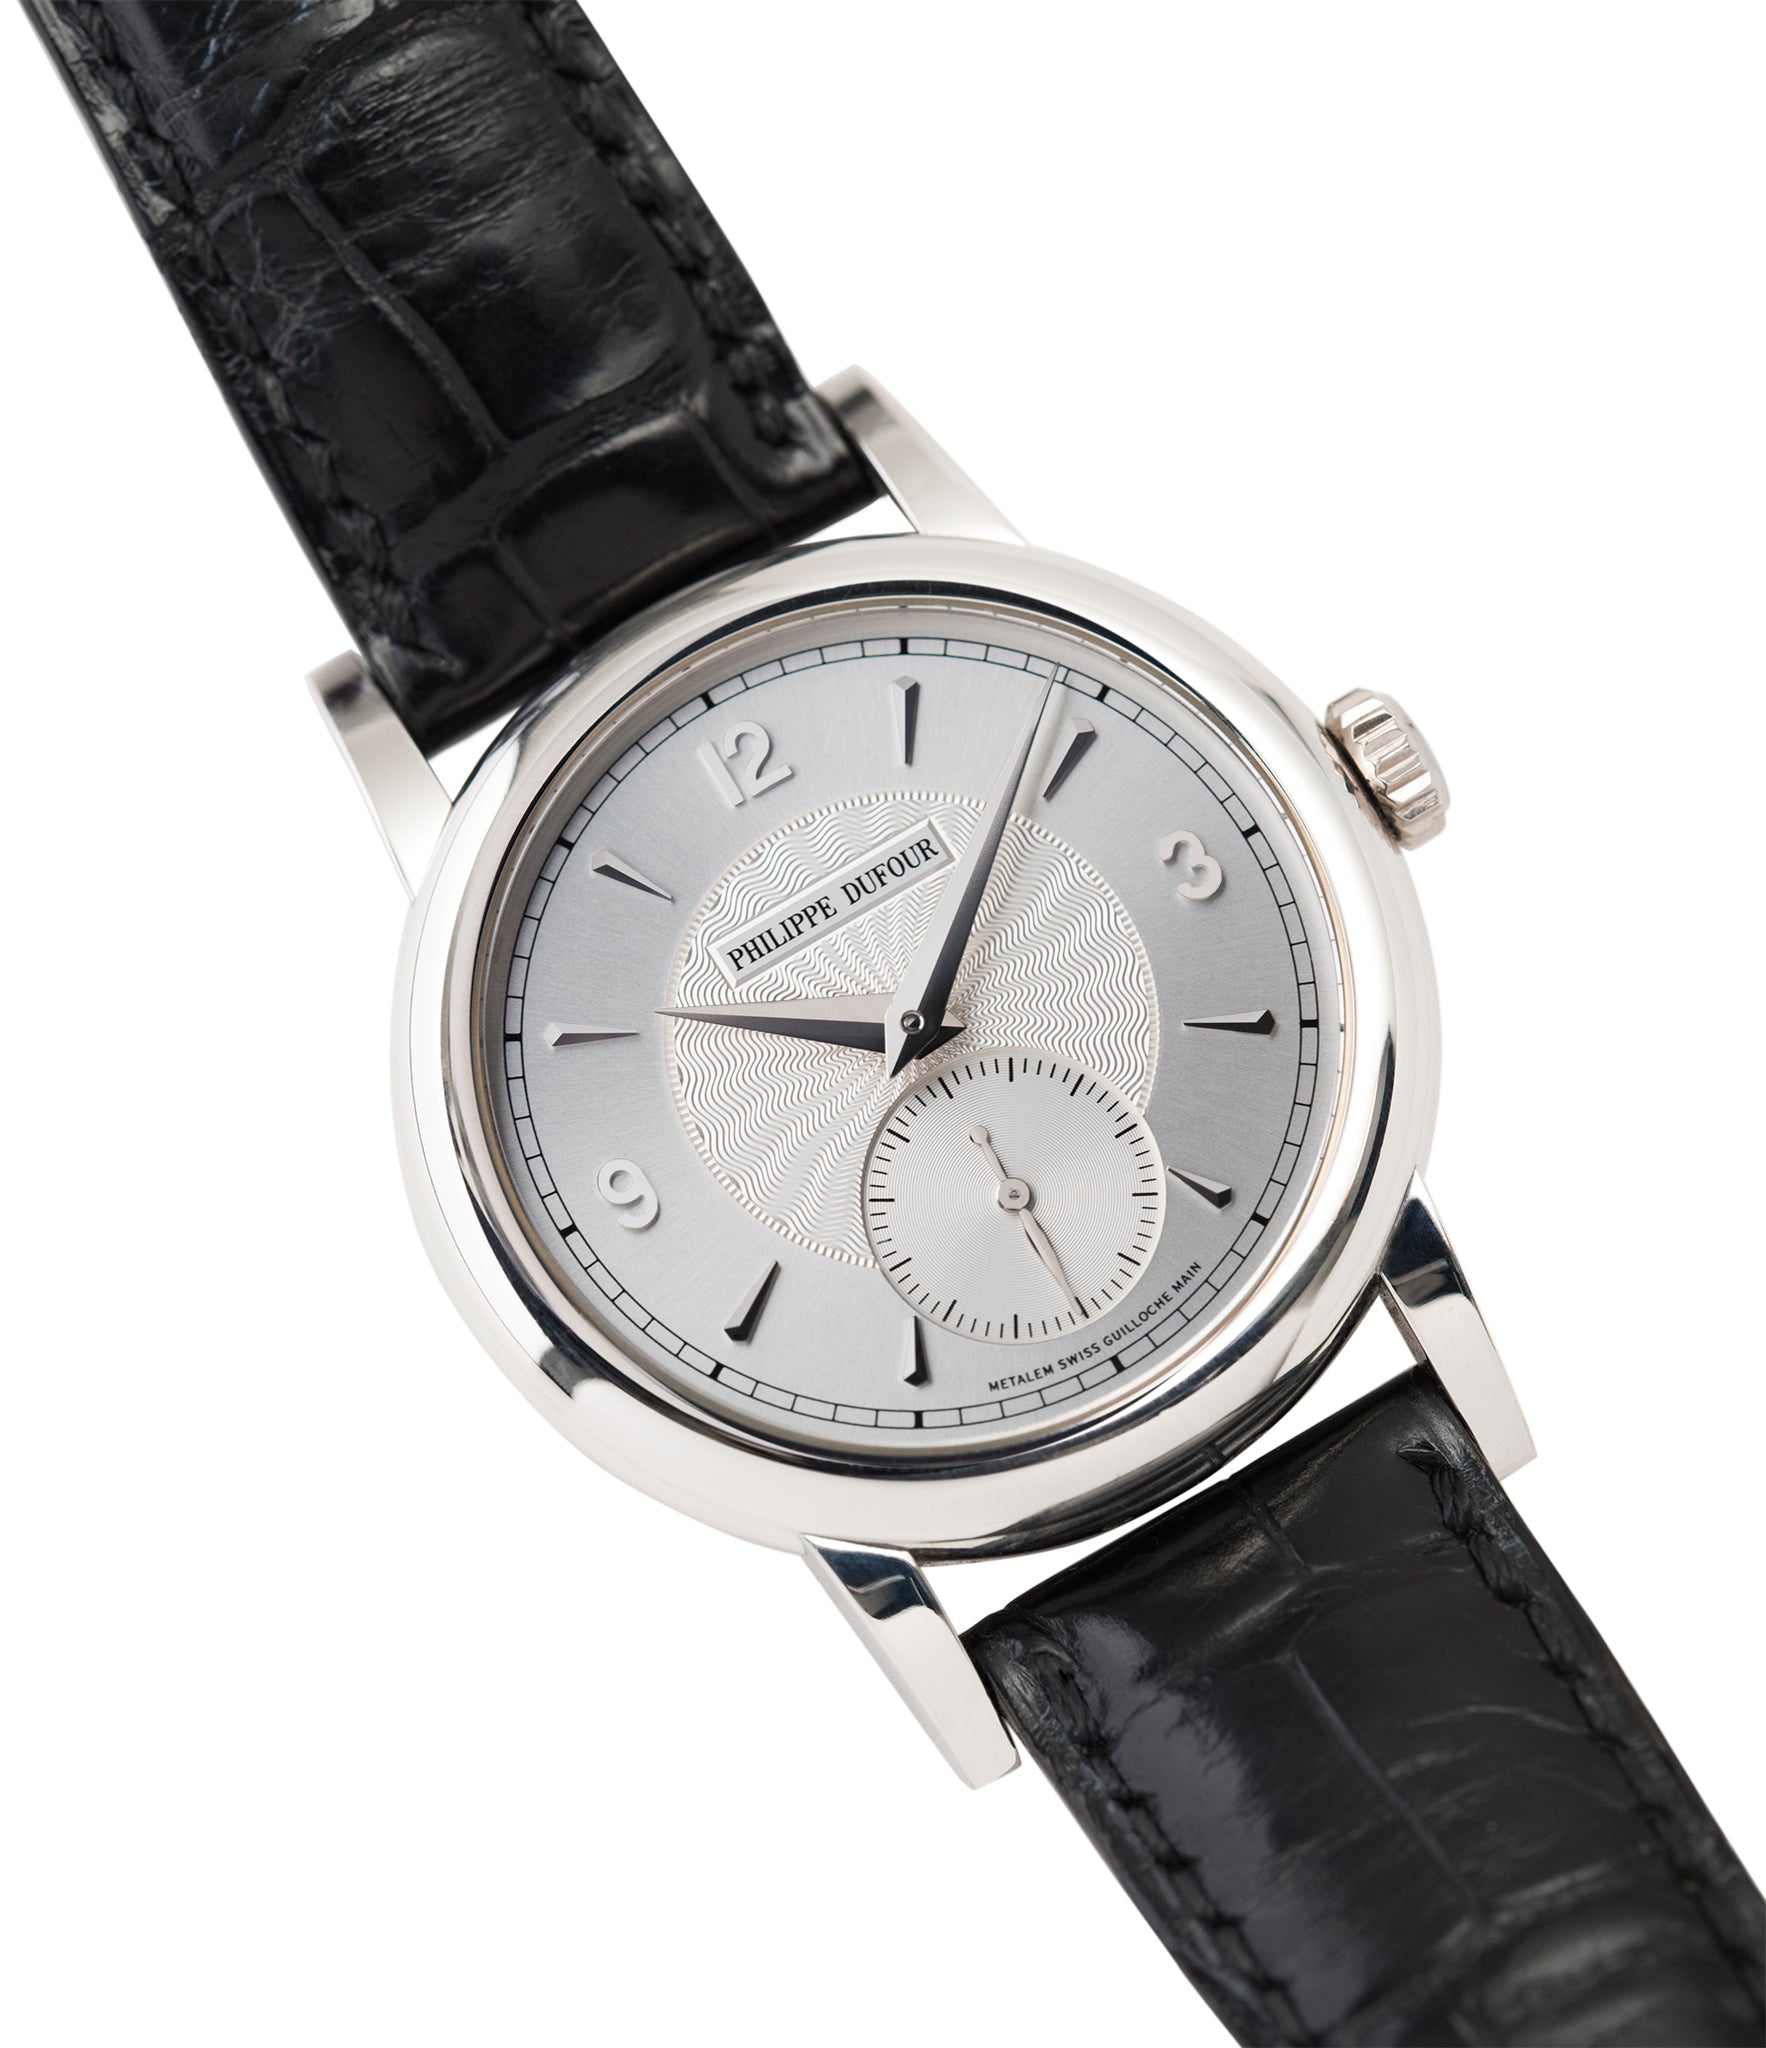 buying Philippe Dufour Simplicity platinum time-only dress watch for sale online at A Collected Man London UK approved specialist of preowned independent watchmakers